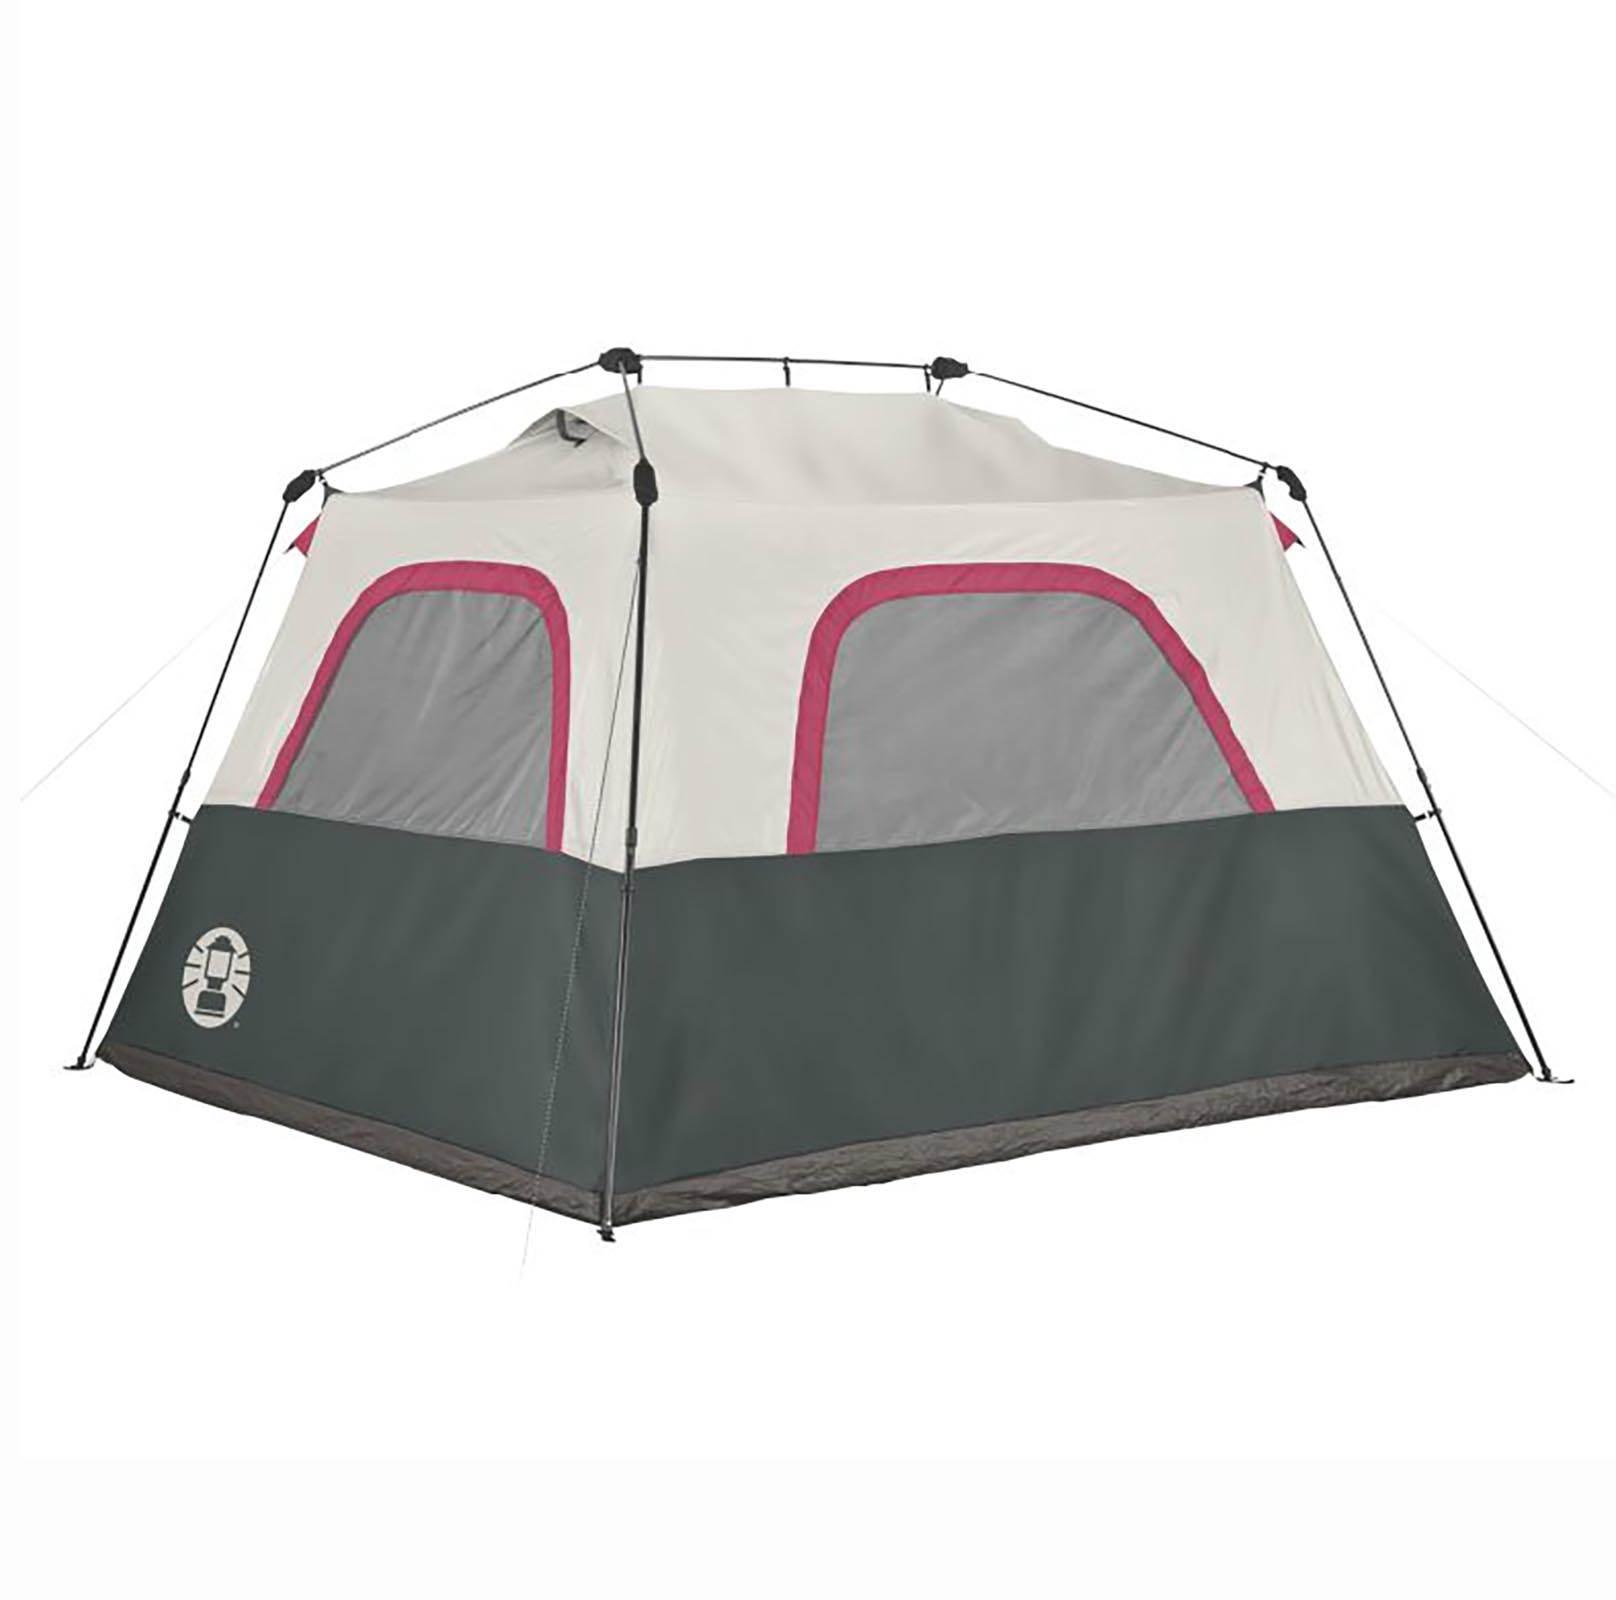 Coleman 6-Person Family Waterproof Camping Instant Cabin Tent 10 x 9 x 6 Feet - image 2 of 7